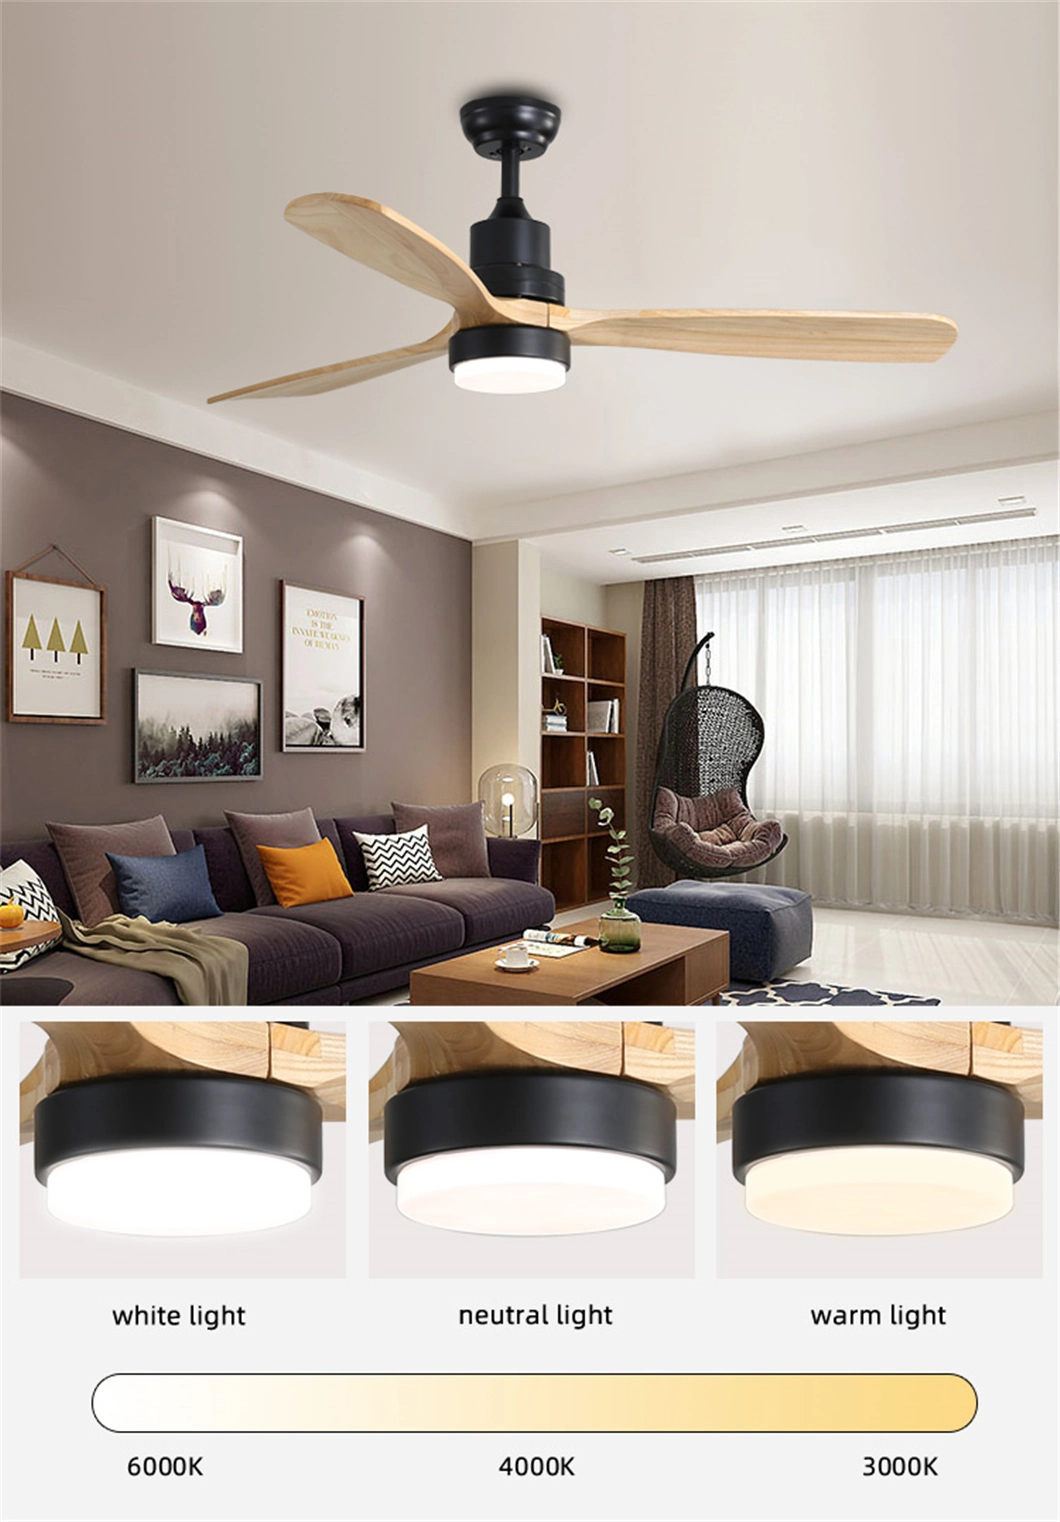 Modern Decorative Remote Control 220V 240V 52 Inch Wood Blades Fan with Light for ceiling